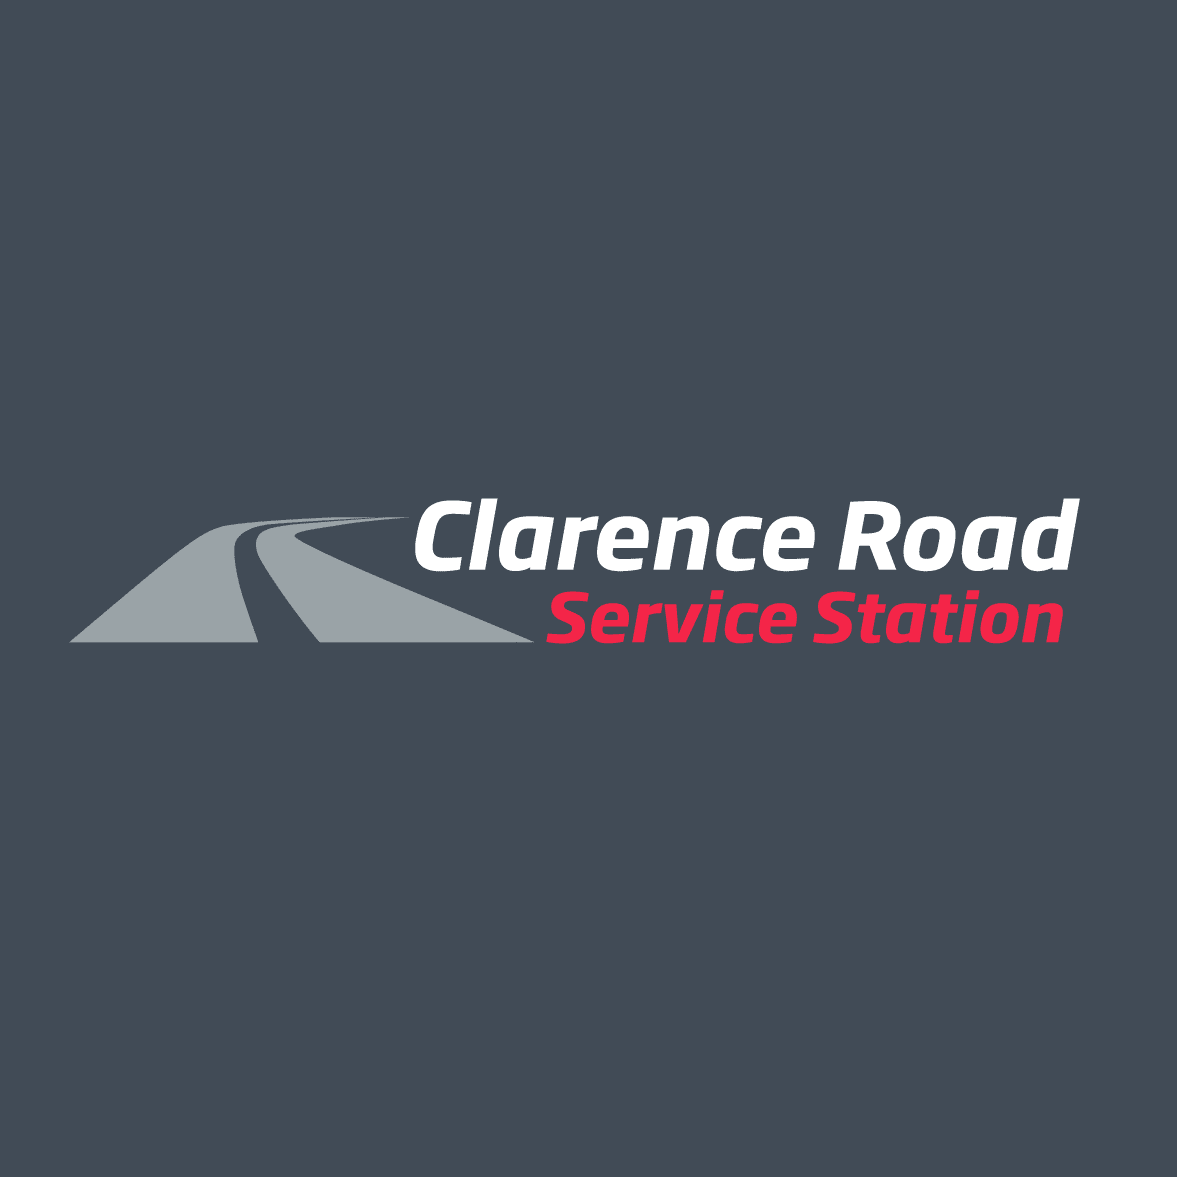 Clarence Road Service Station